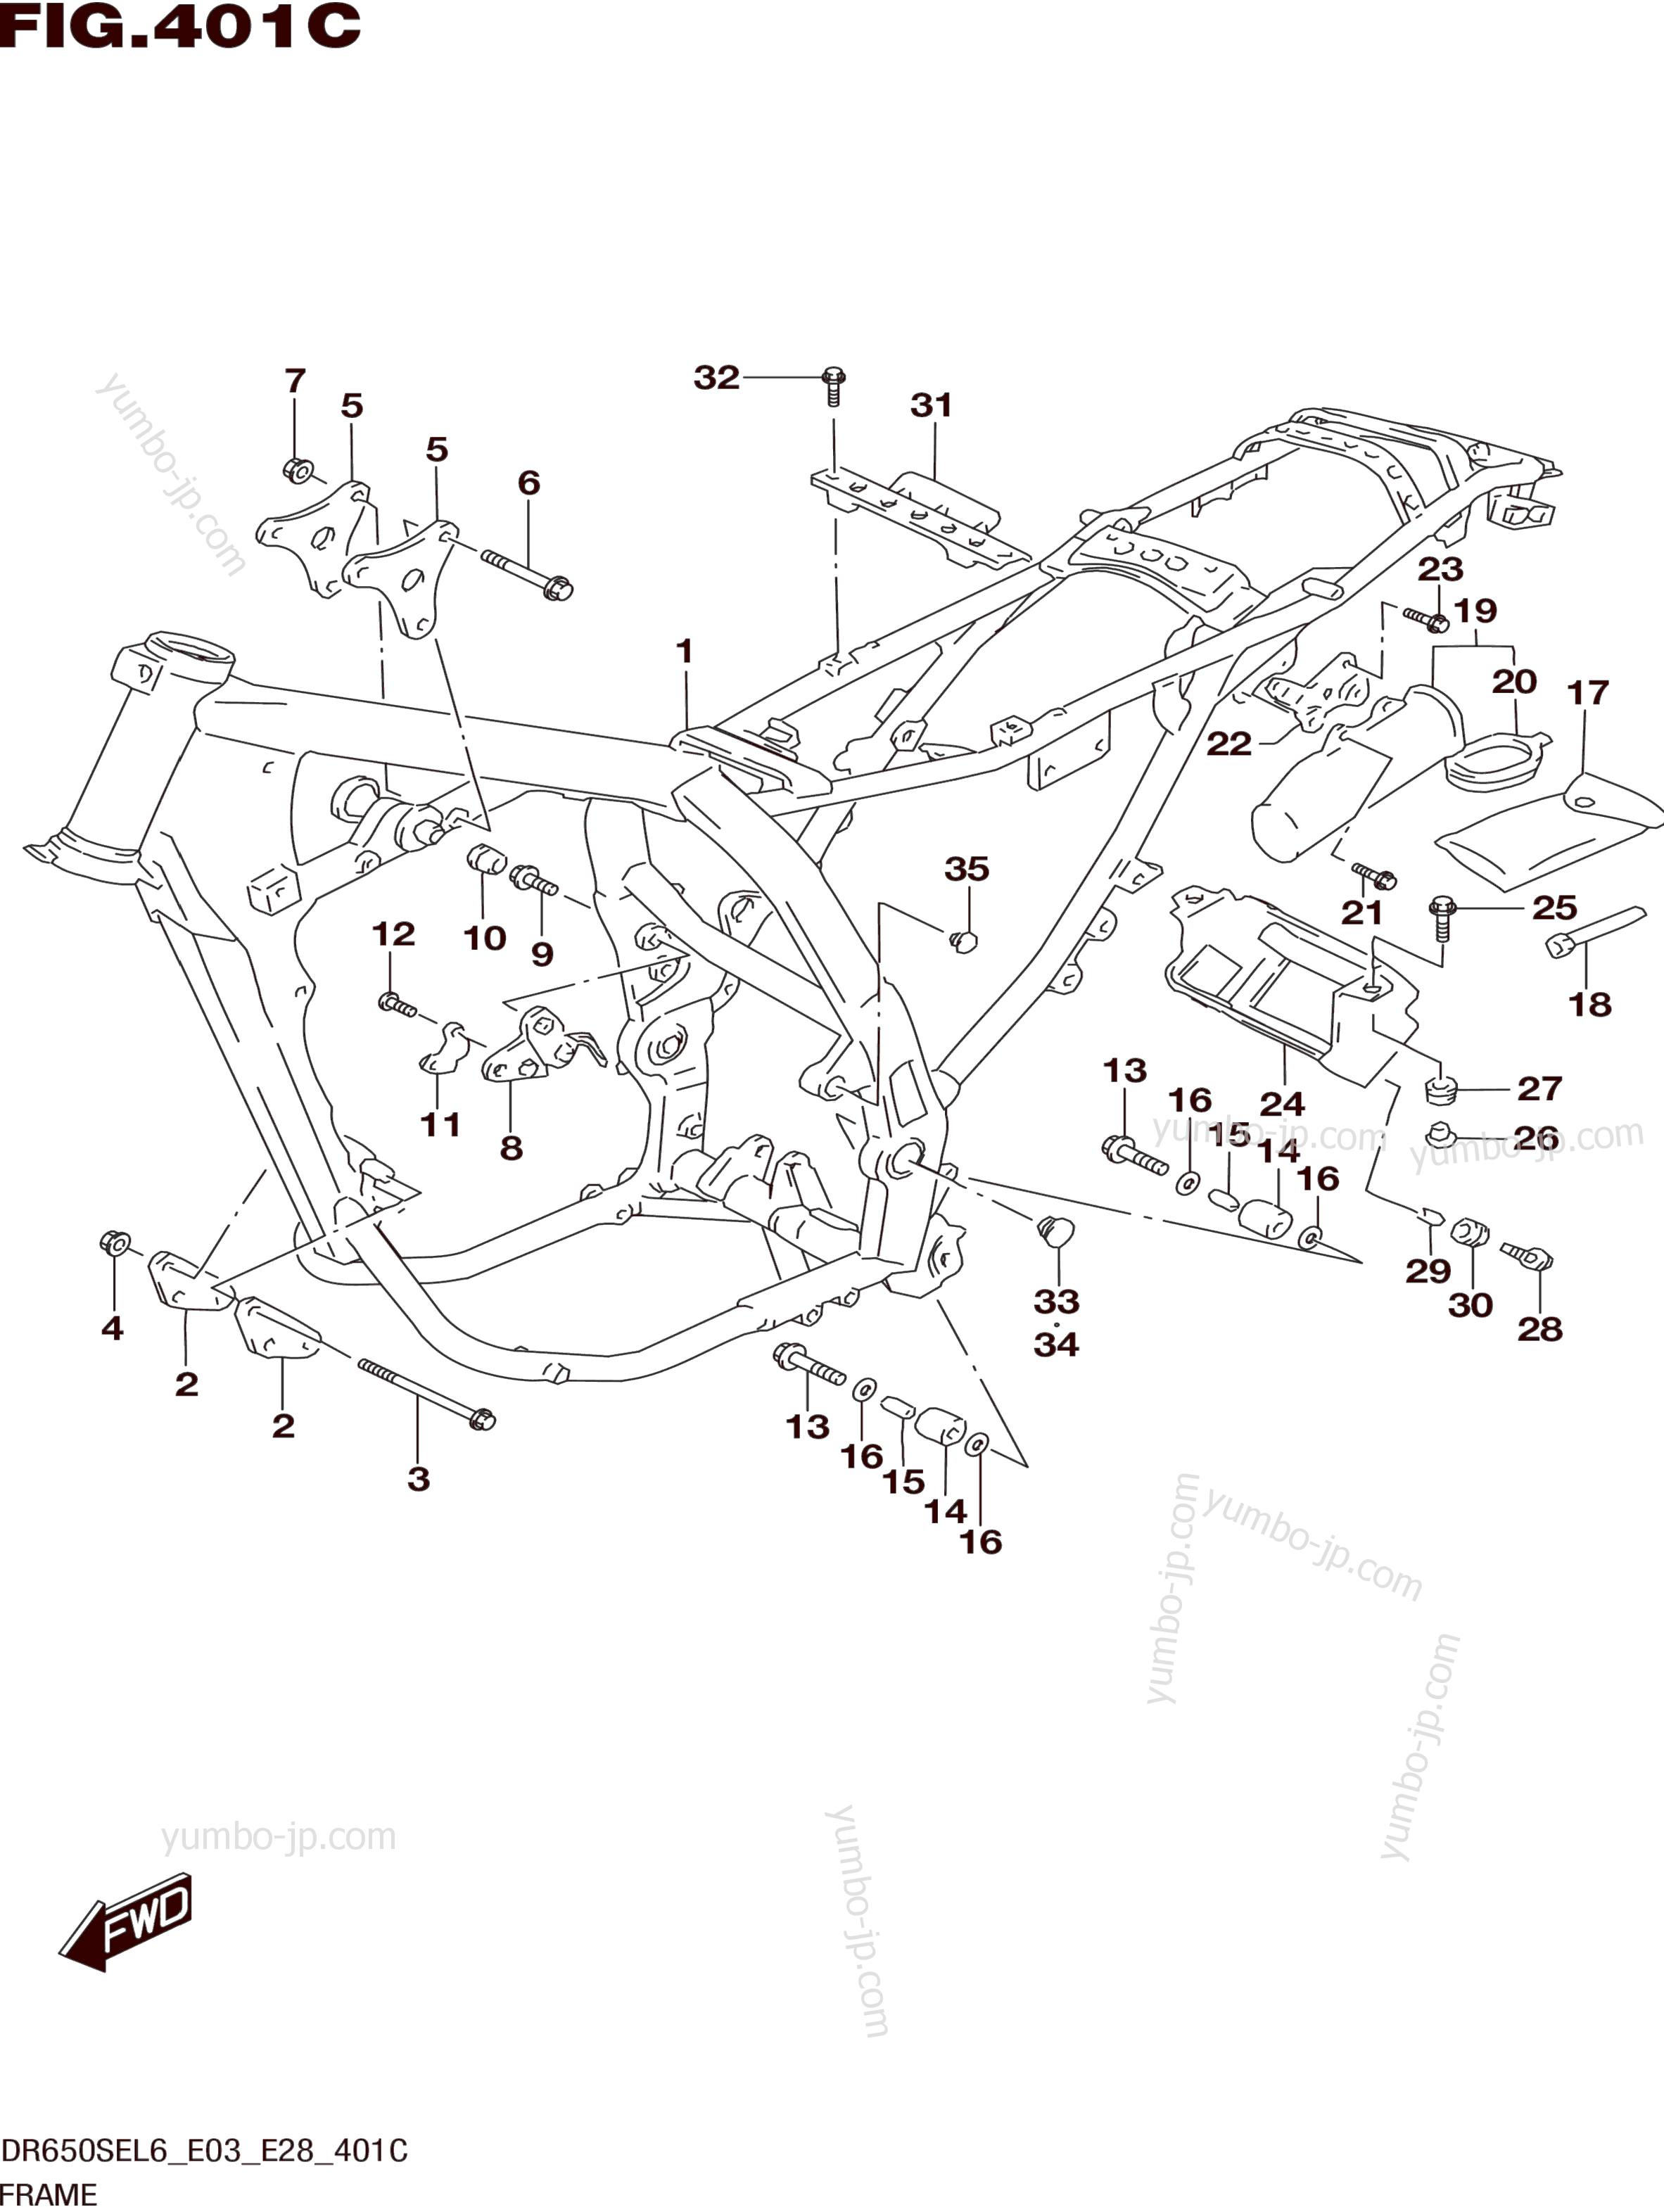 FRAME (DR650SEL6 E33) for motorcycles SUZUKI DR650SE 2016 year